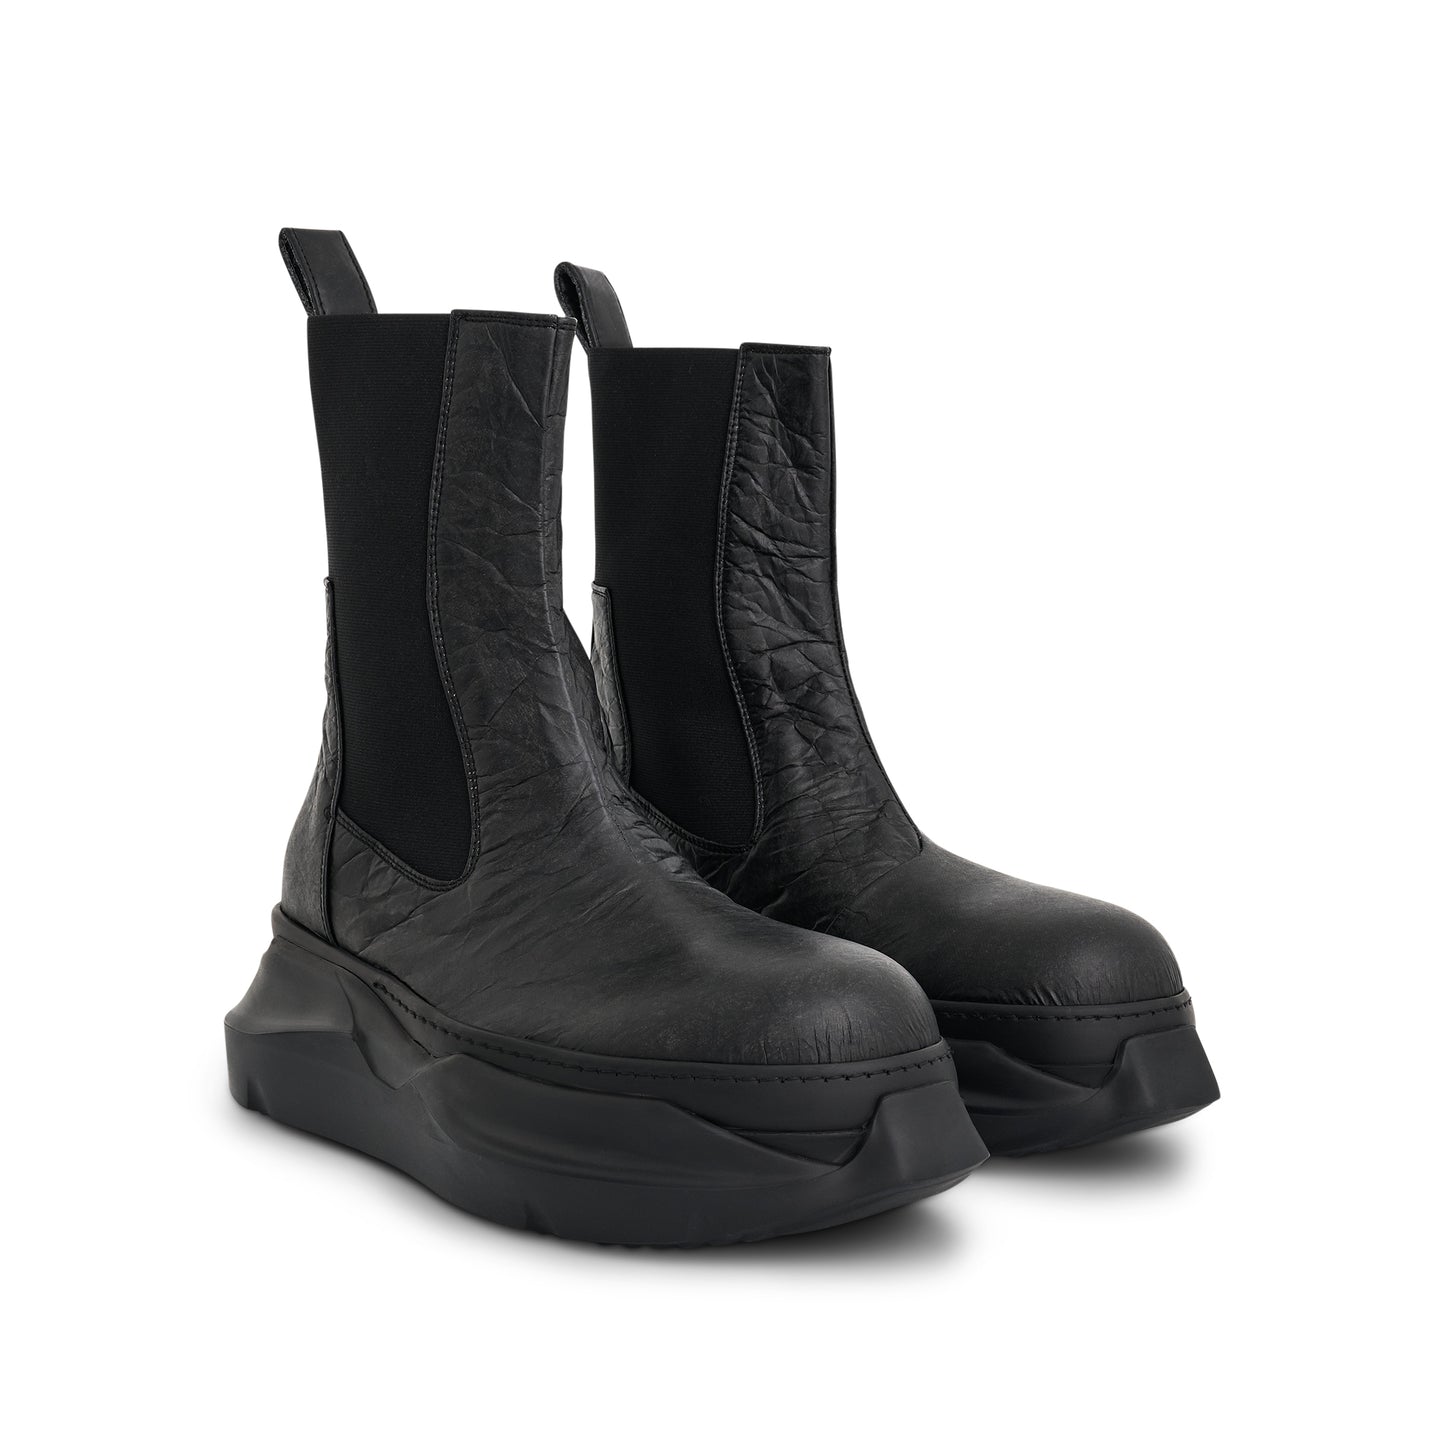 Beatle Abstract Sole Boots in Black/Black